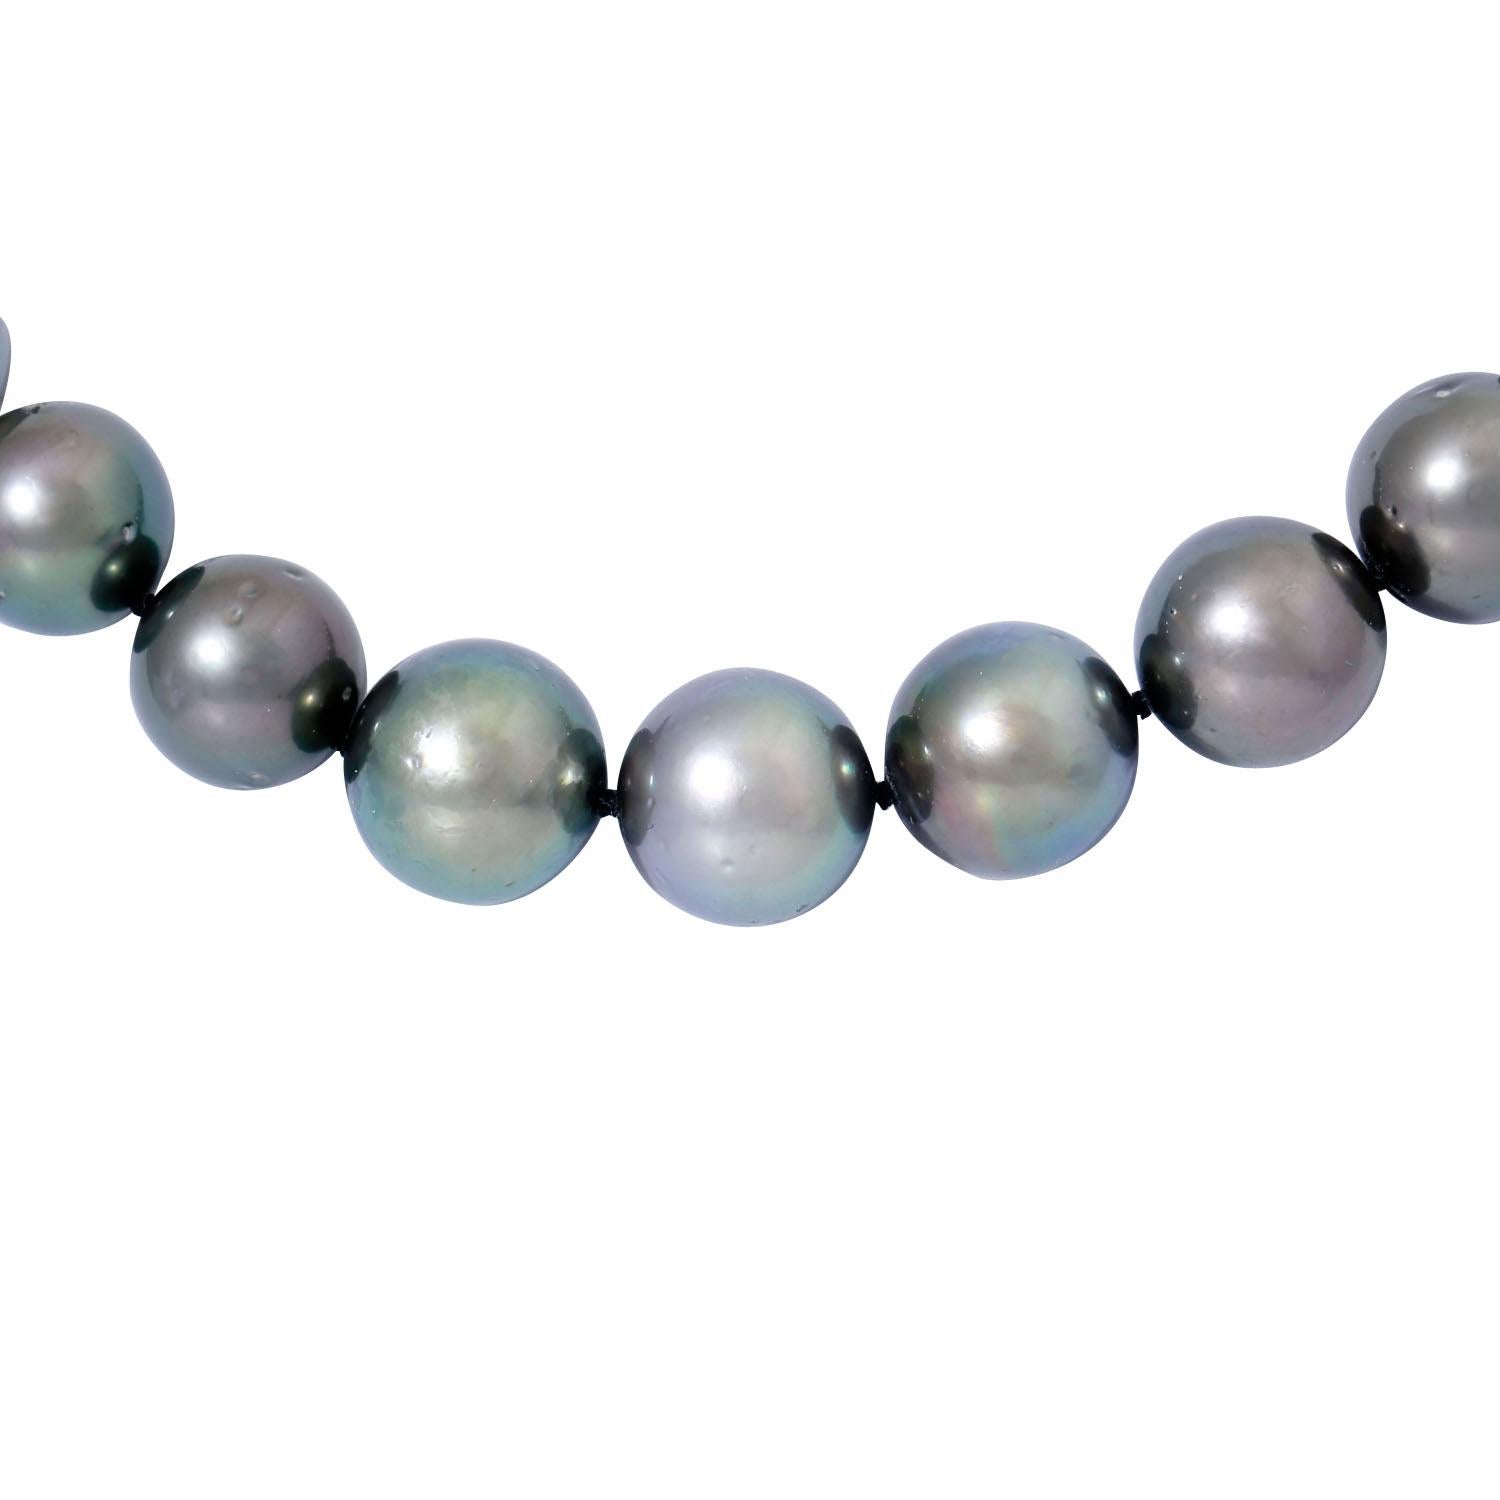 33 Tahitian cultured pearls, clasp set with 216 brilliant-cut diamonds total approx. 4.36ct FW (G)/SI, WG 18K, 9.6g, L: variable from 43-45cm, 1 Tahitian cultured pearl as a bayonet clasp to change. 21st century, like new.

 Tahitian pearl necklace,